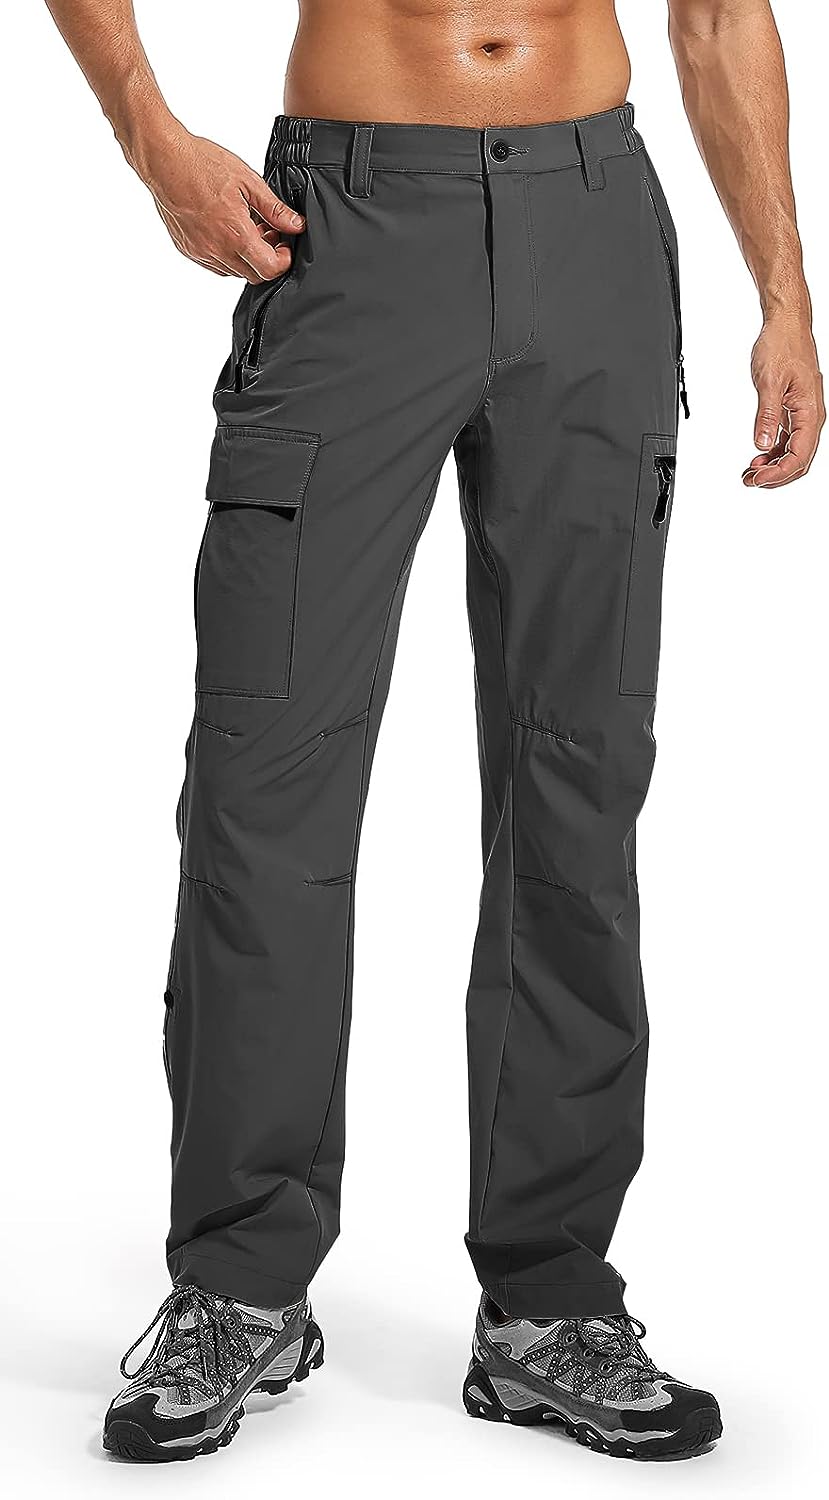 Outdoor Hiking Trousers Men Quick Dry Lightweight Breathable